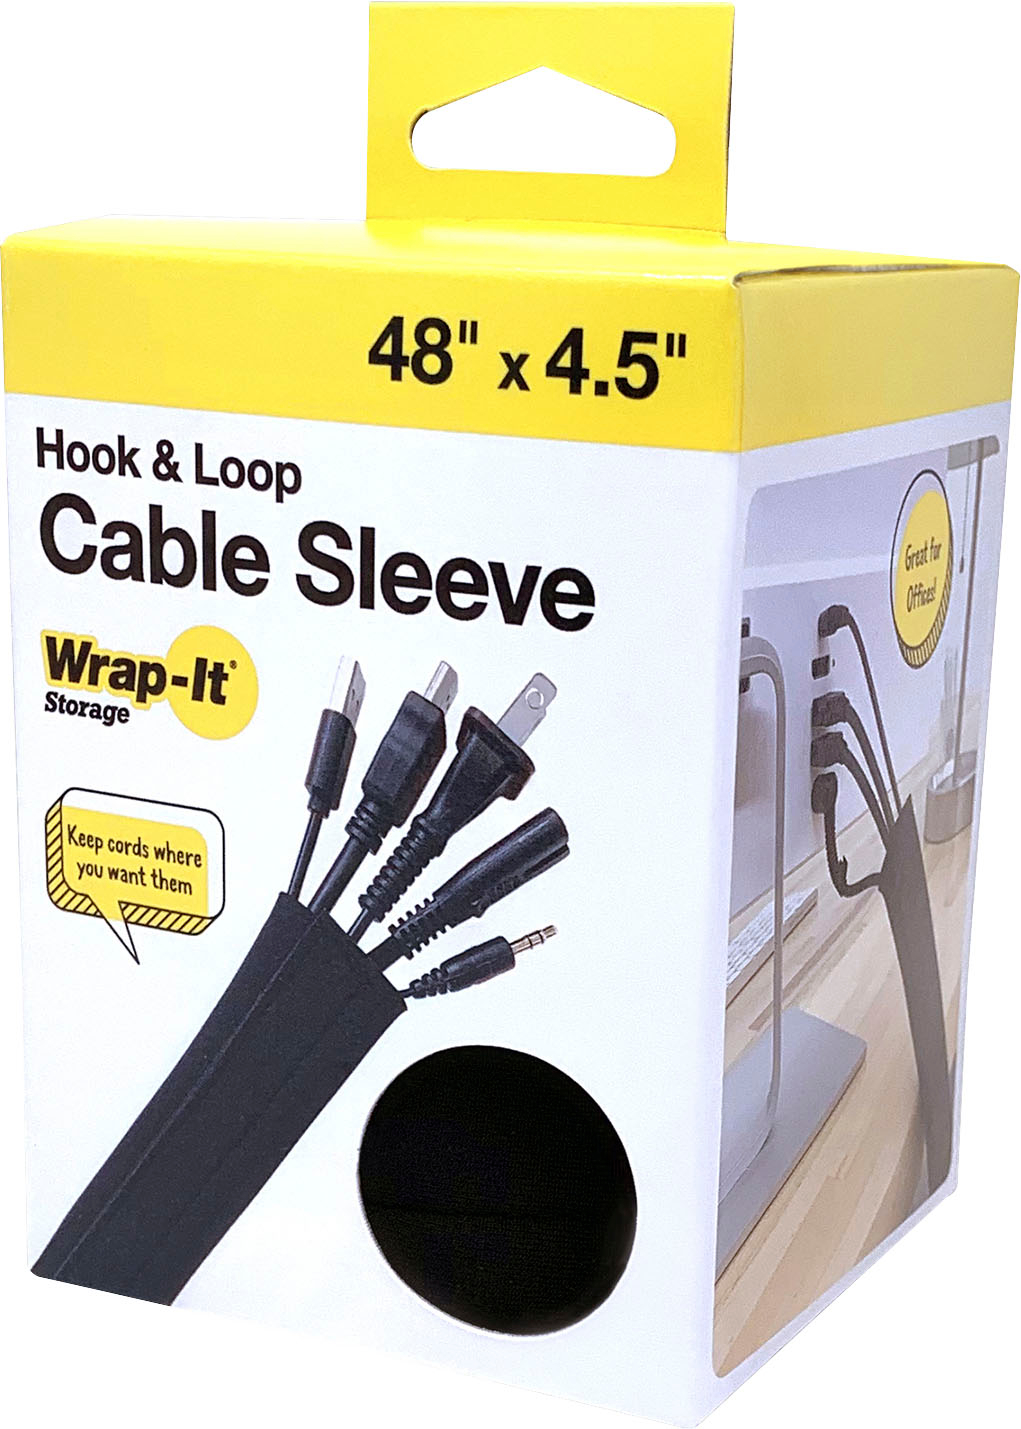 They're best sellers for a reason - snag yourself a cable lock for